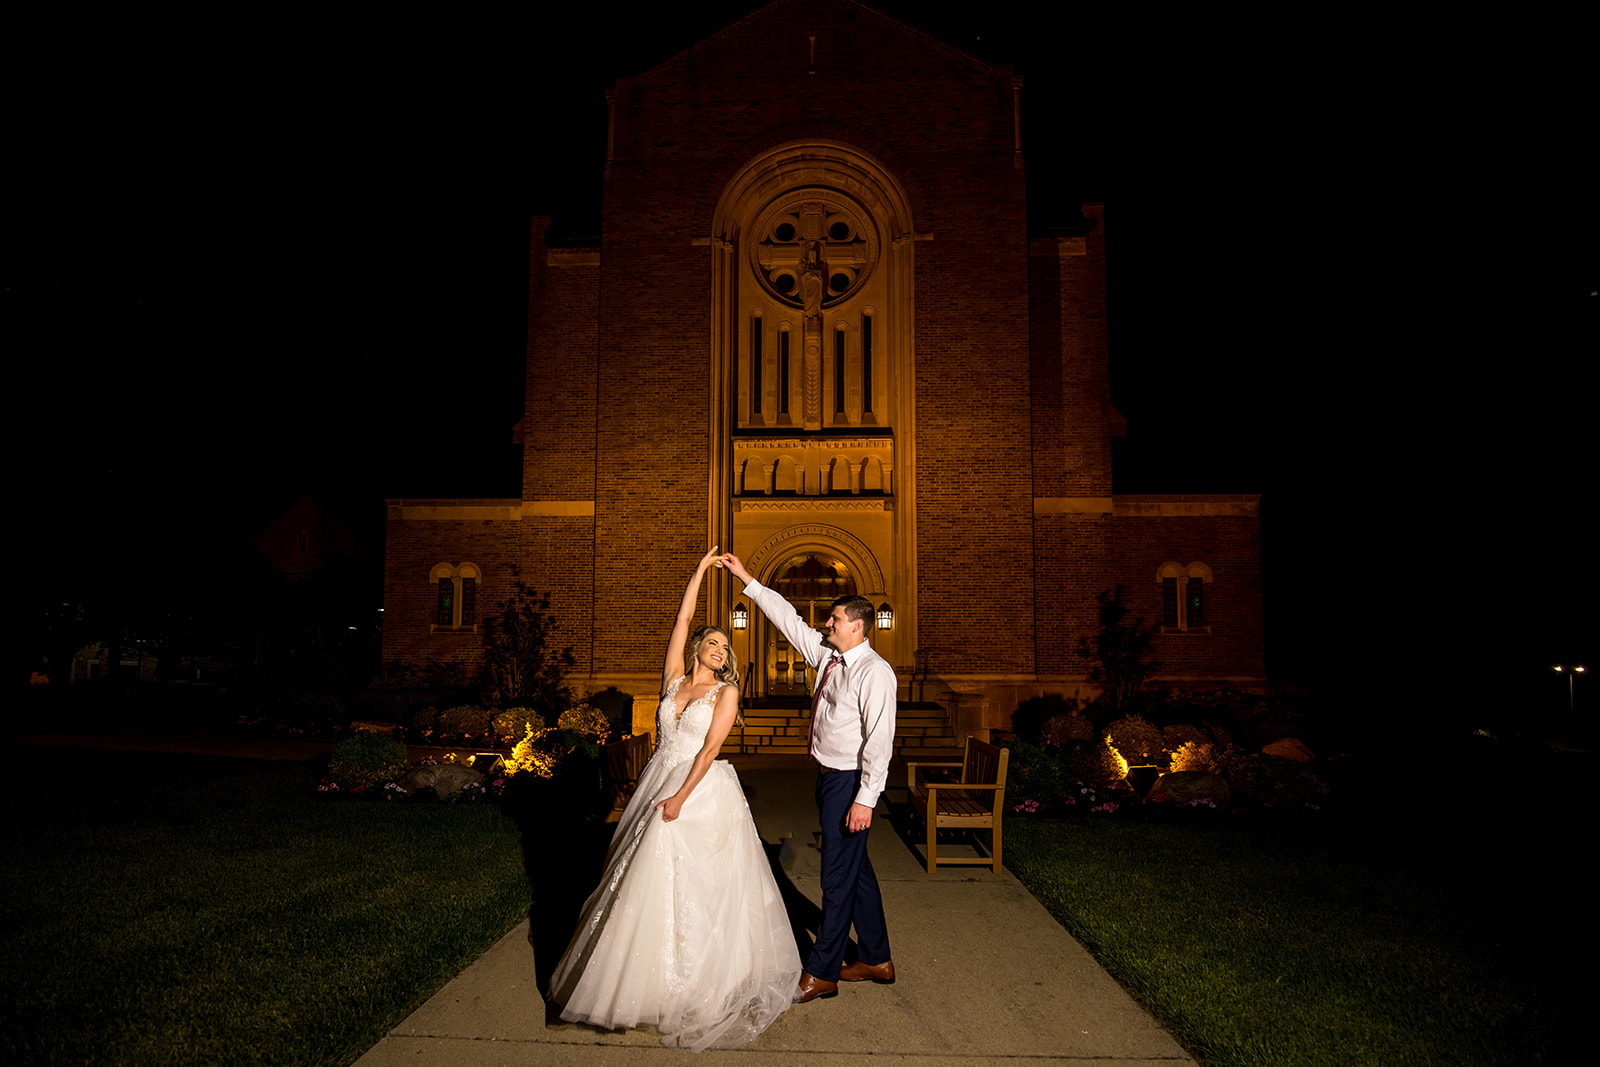 Wedding couple dance at nighttime in front of their Catholic church in Northern Kentucky